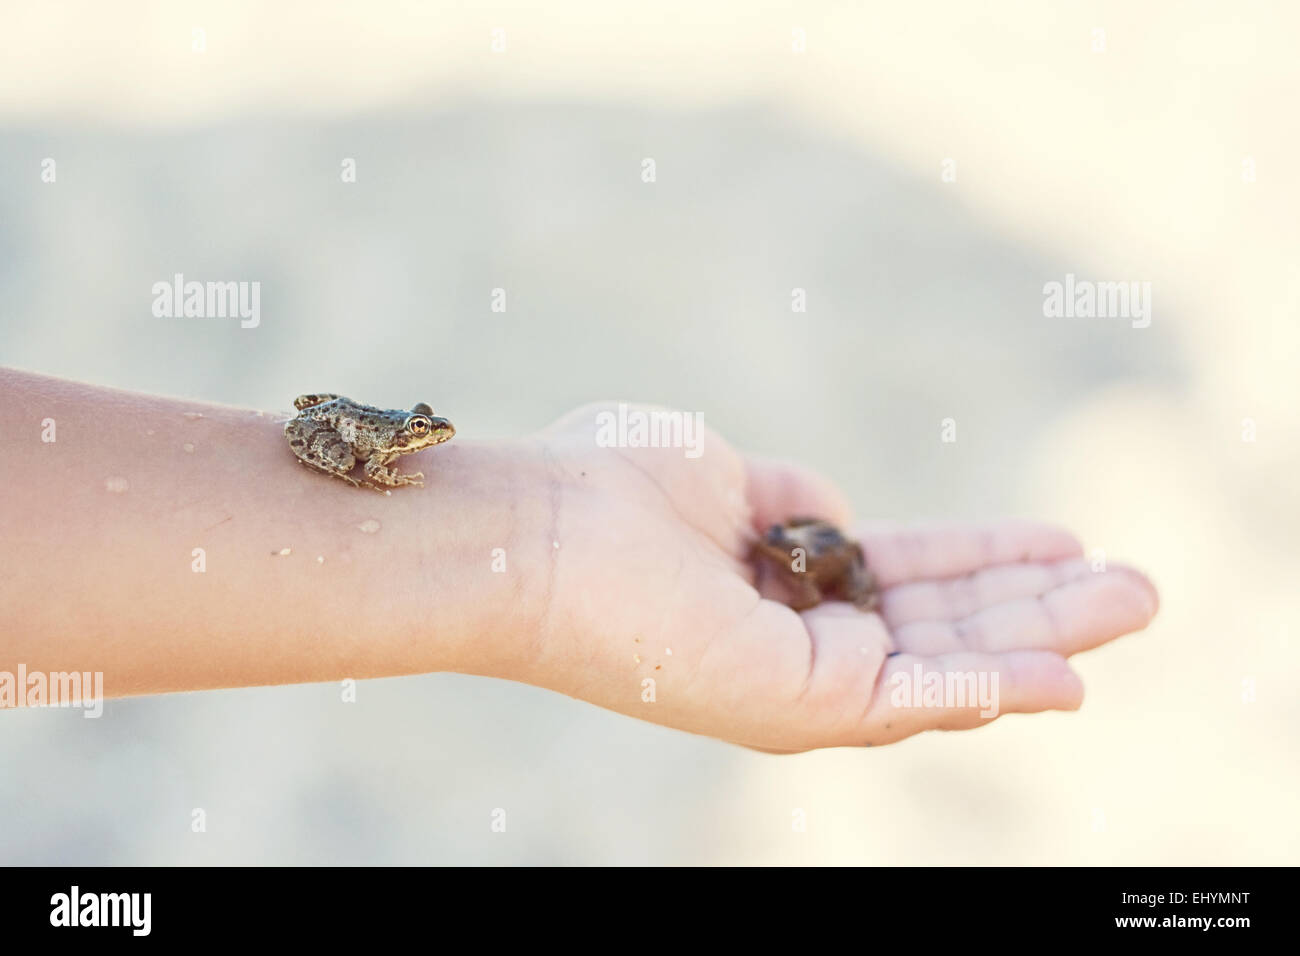 Tiny frog sitting on a child's hand Stock Photo